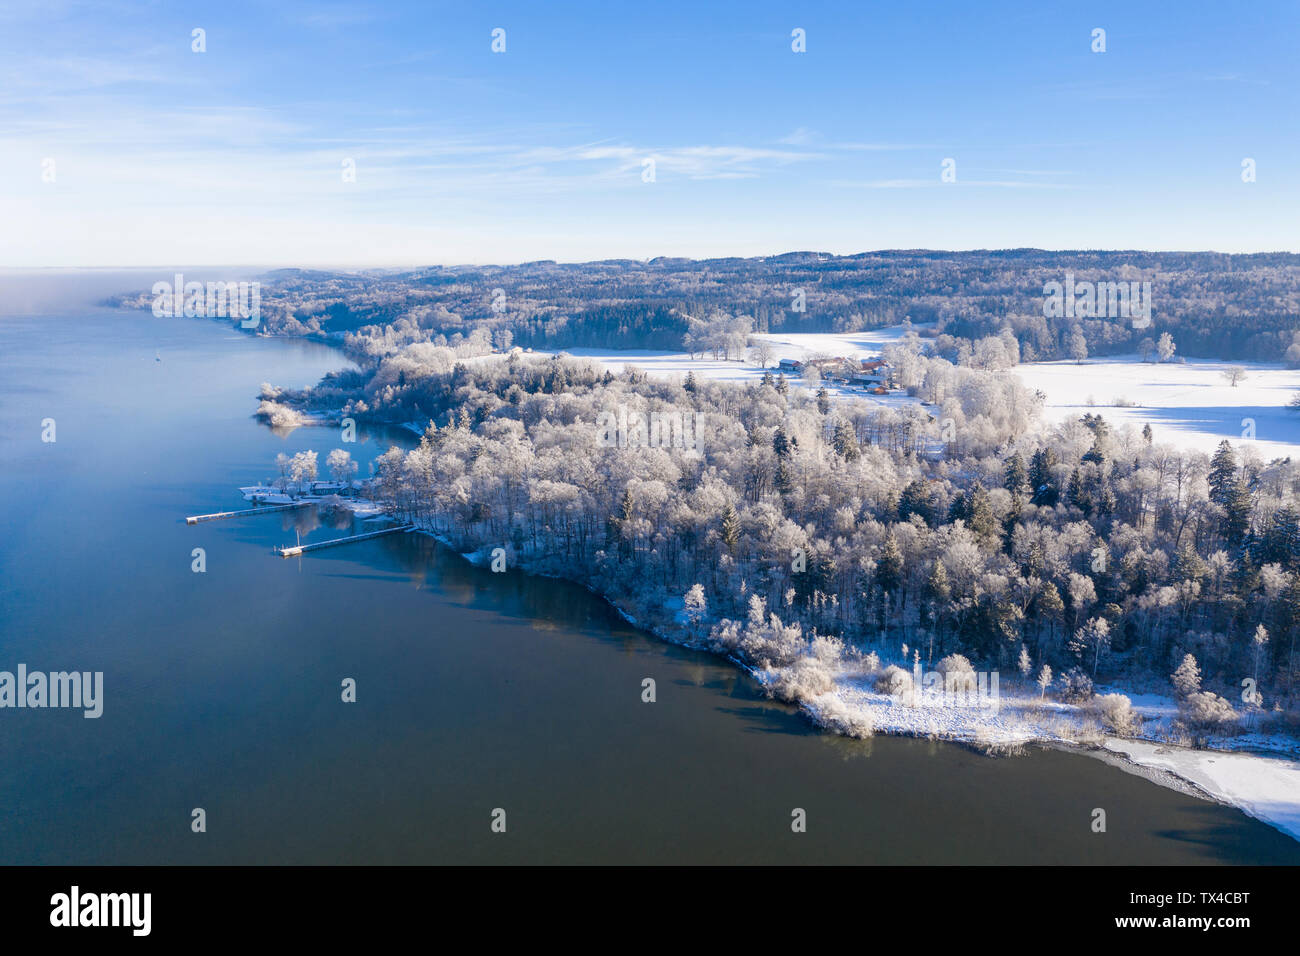 Germany, Bavaria, Sankt Heinrich, snowy forest at Lake Starnberg, aerial view Stock Photo